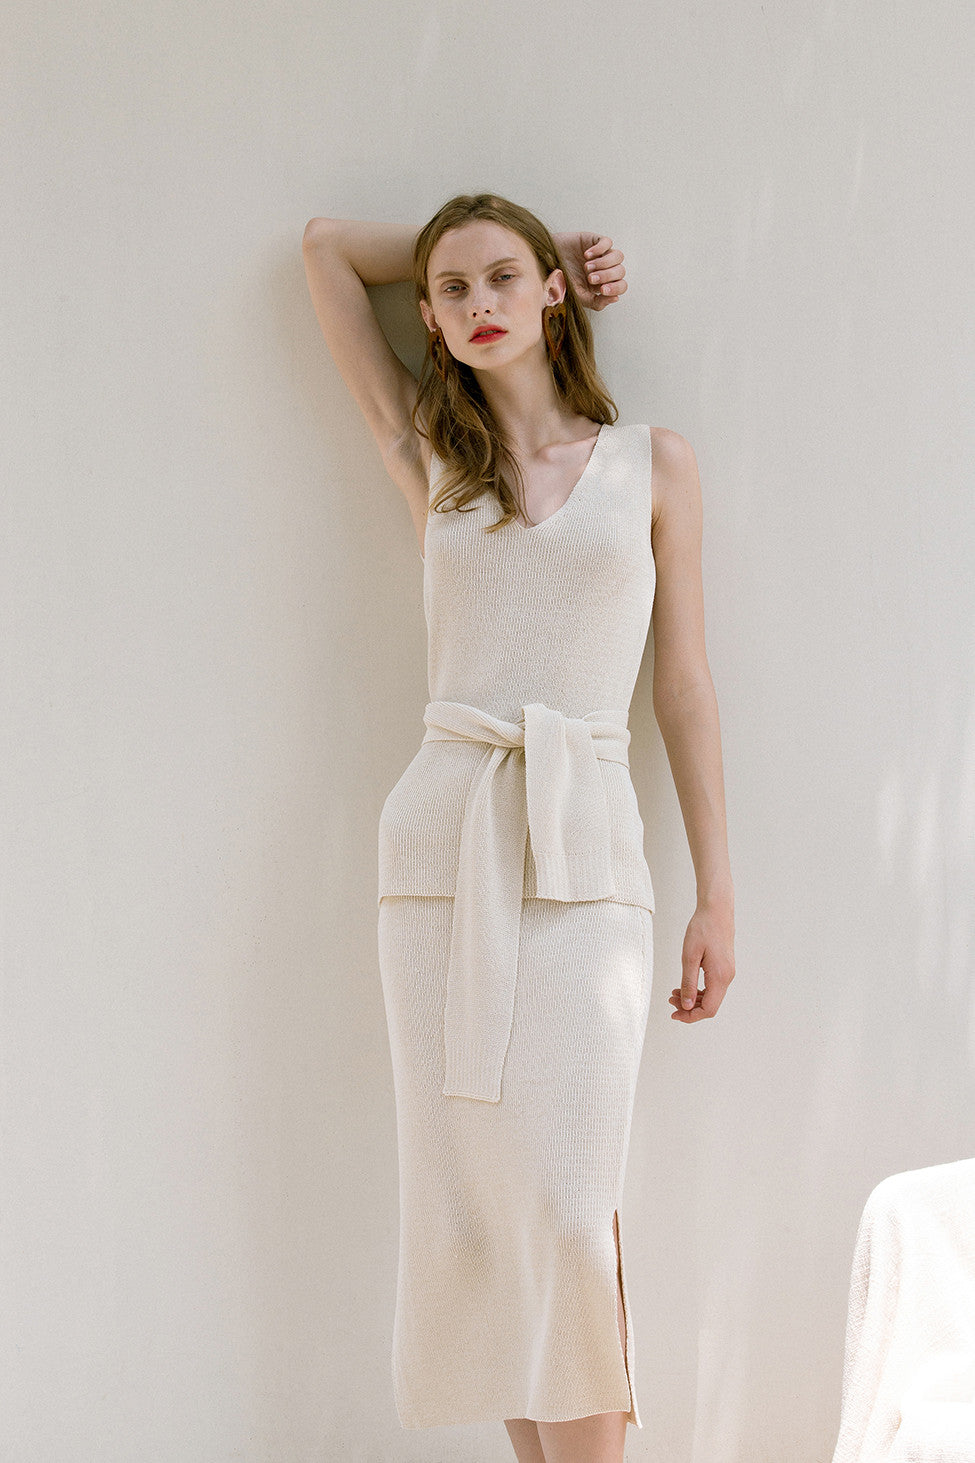 The Mikaela Top in lightweight knitted with V-neckline. Sleeveless. Detachable sash belt. Pull on.